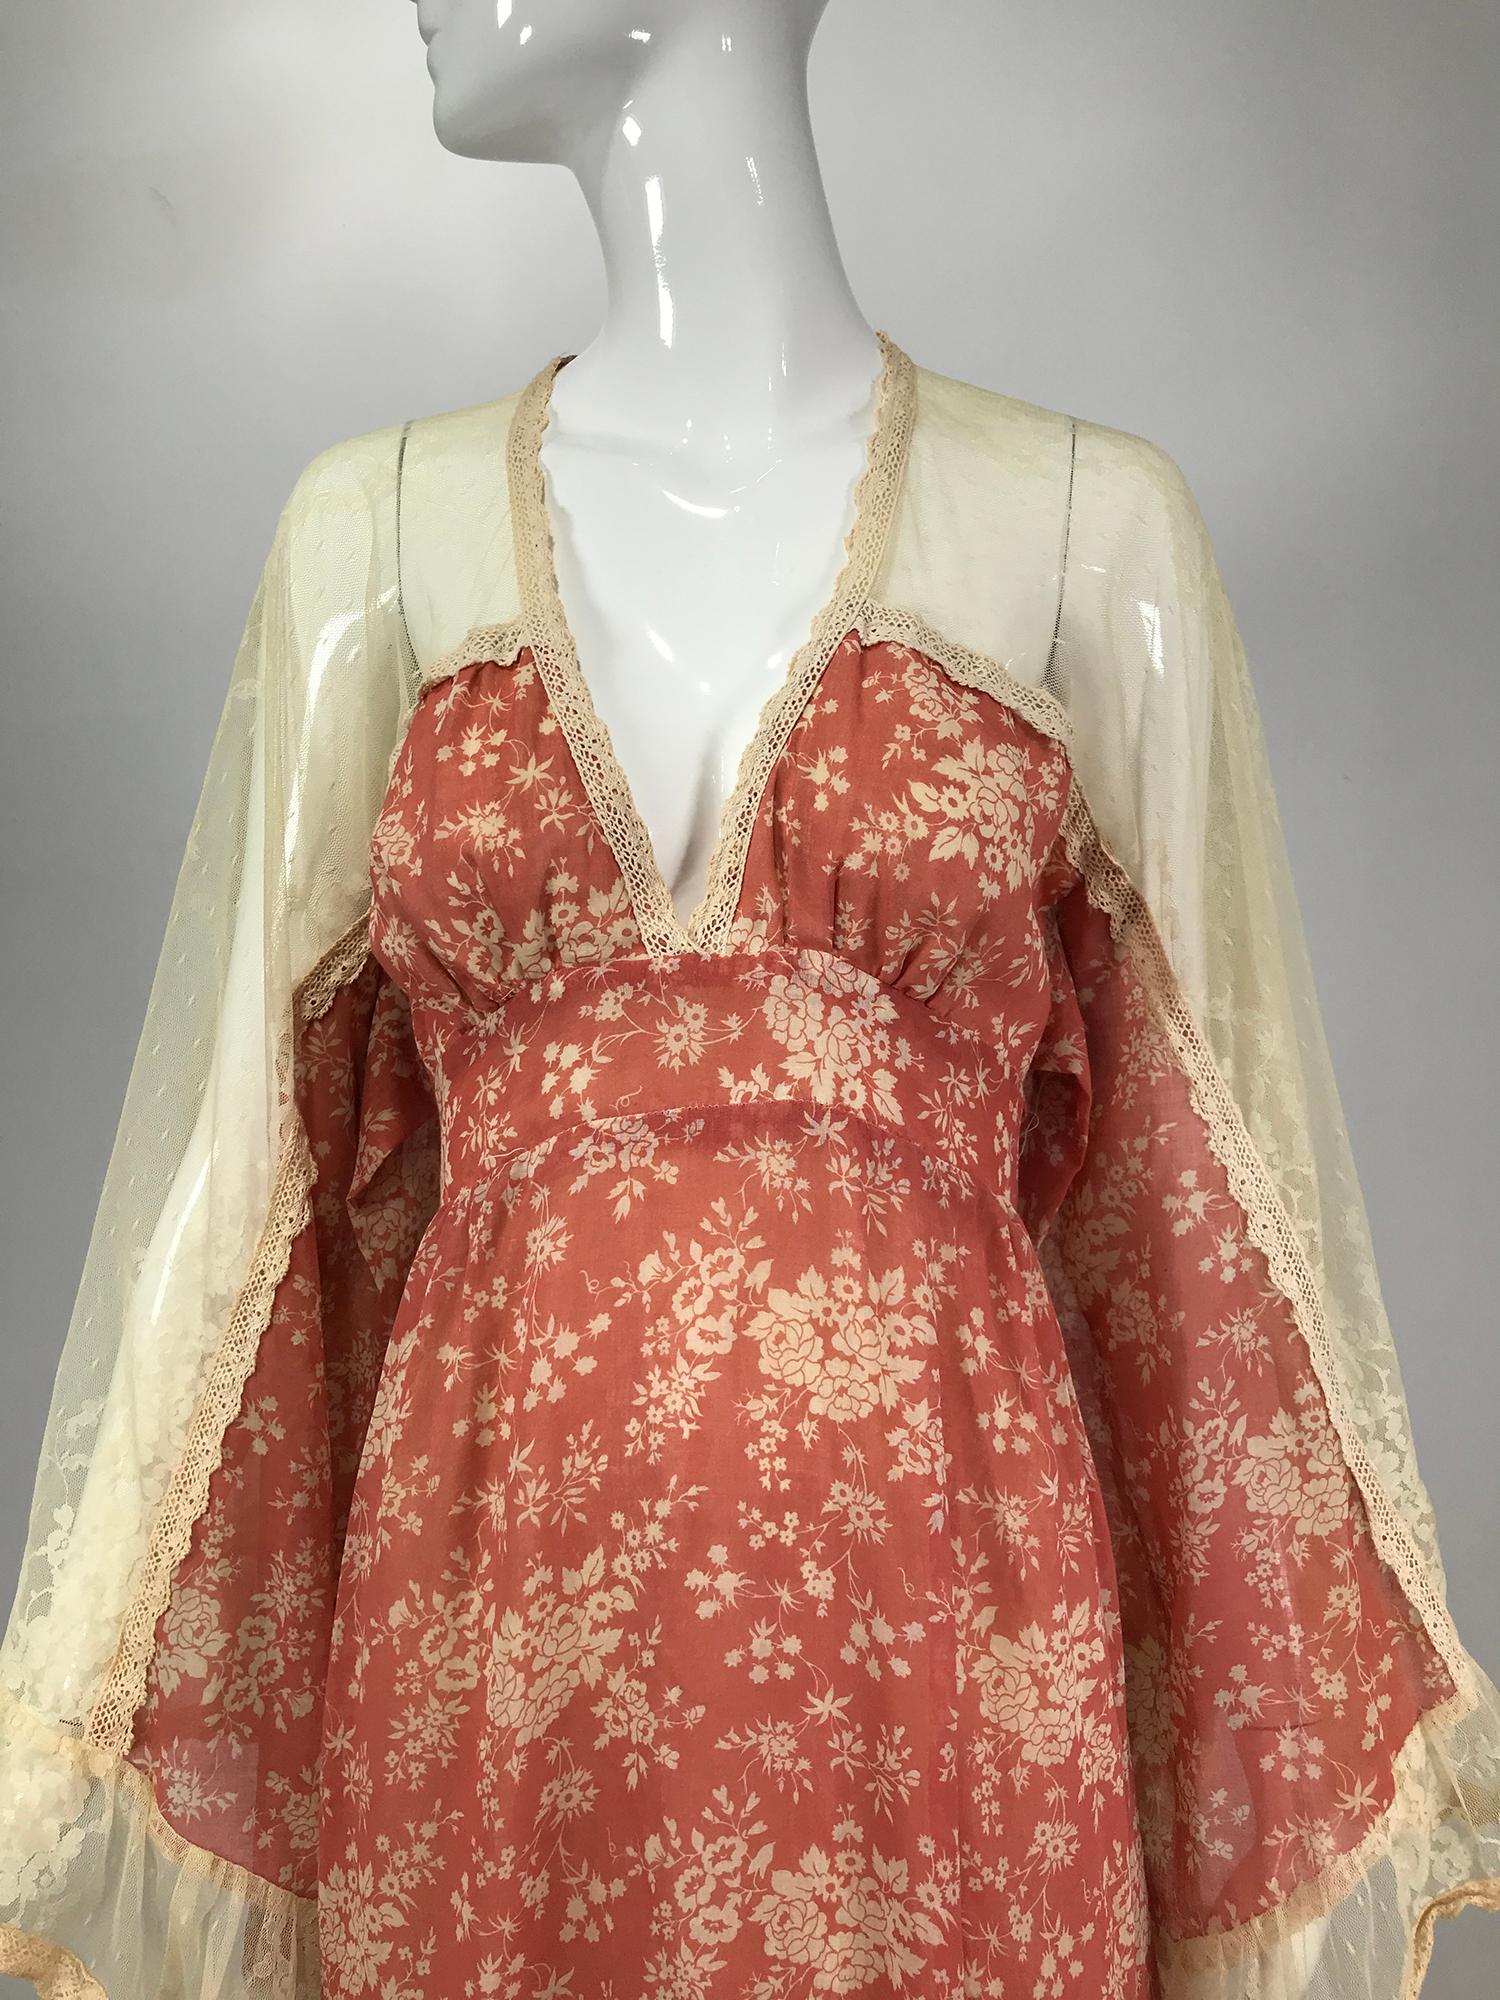 GunneSax by Jessica made in San Francisco, tulle shoulder angel sleeve calico prairie dress 1969. Early rare open tulle shoulder calico prairie dress with huge angel sleeves. The fabric is a pale coral with cream sprigged flowers, v neck empire